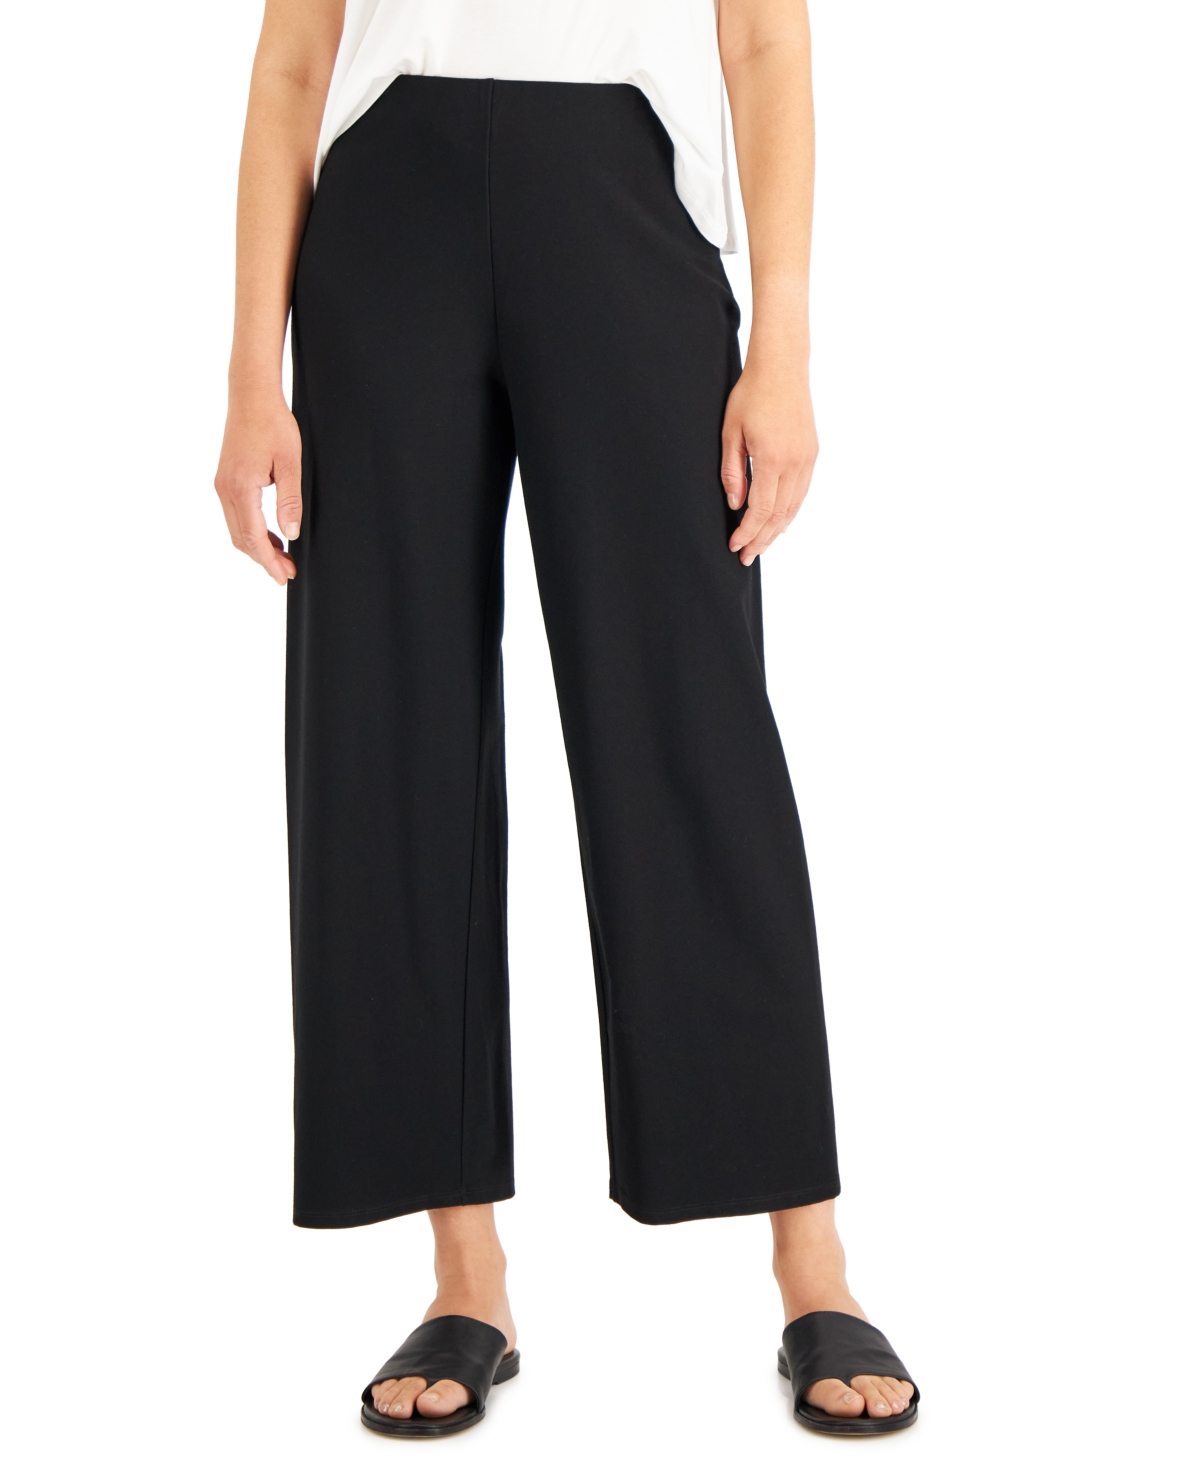 Eileen Fisher Women's Straight Cropped Pants, Regular & Plus Sizes